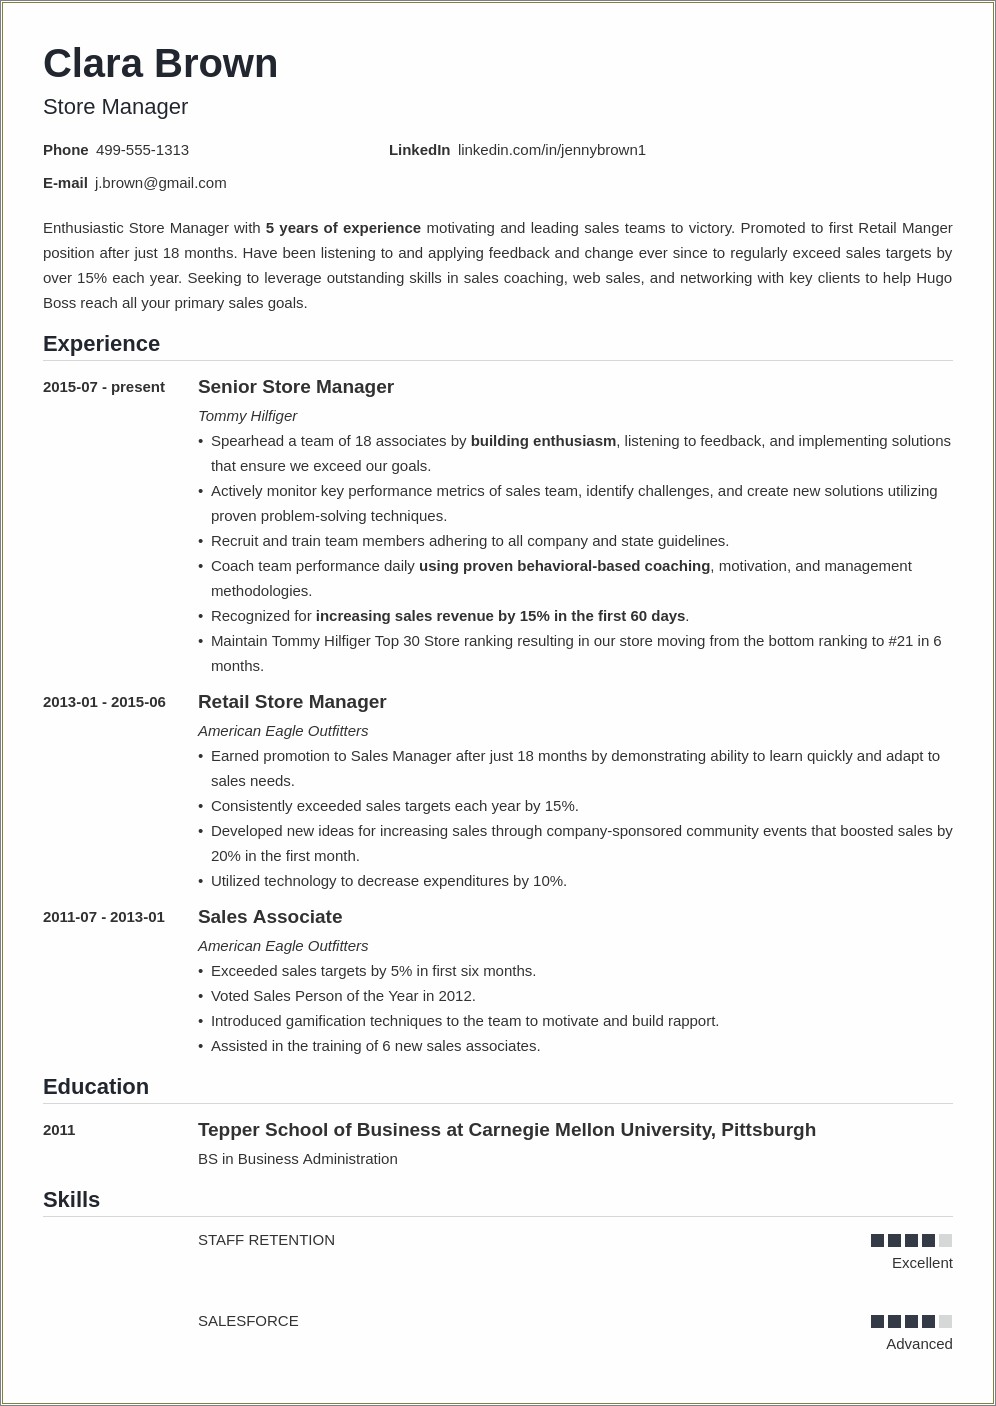 Customer Service Assistant Ecommerce Resume Samples